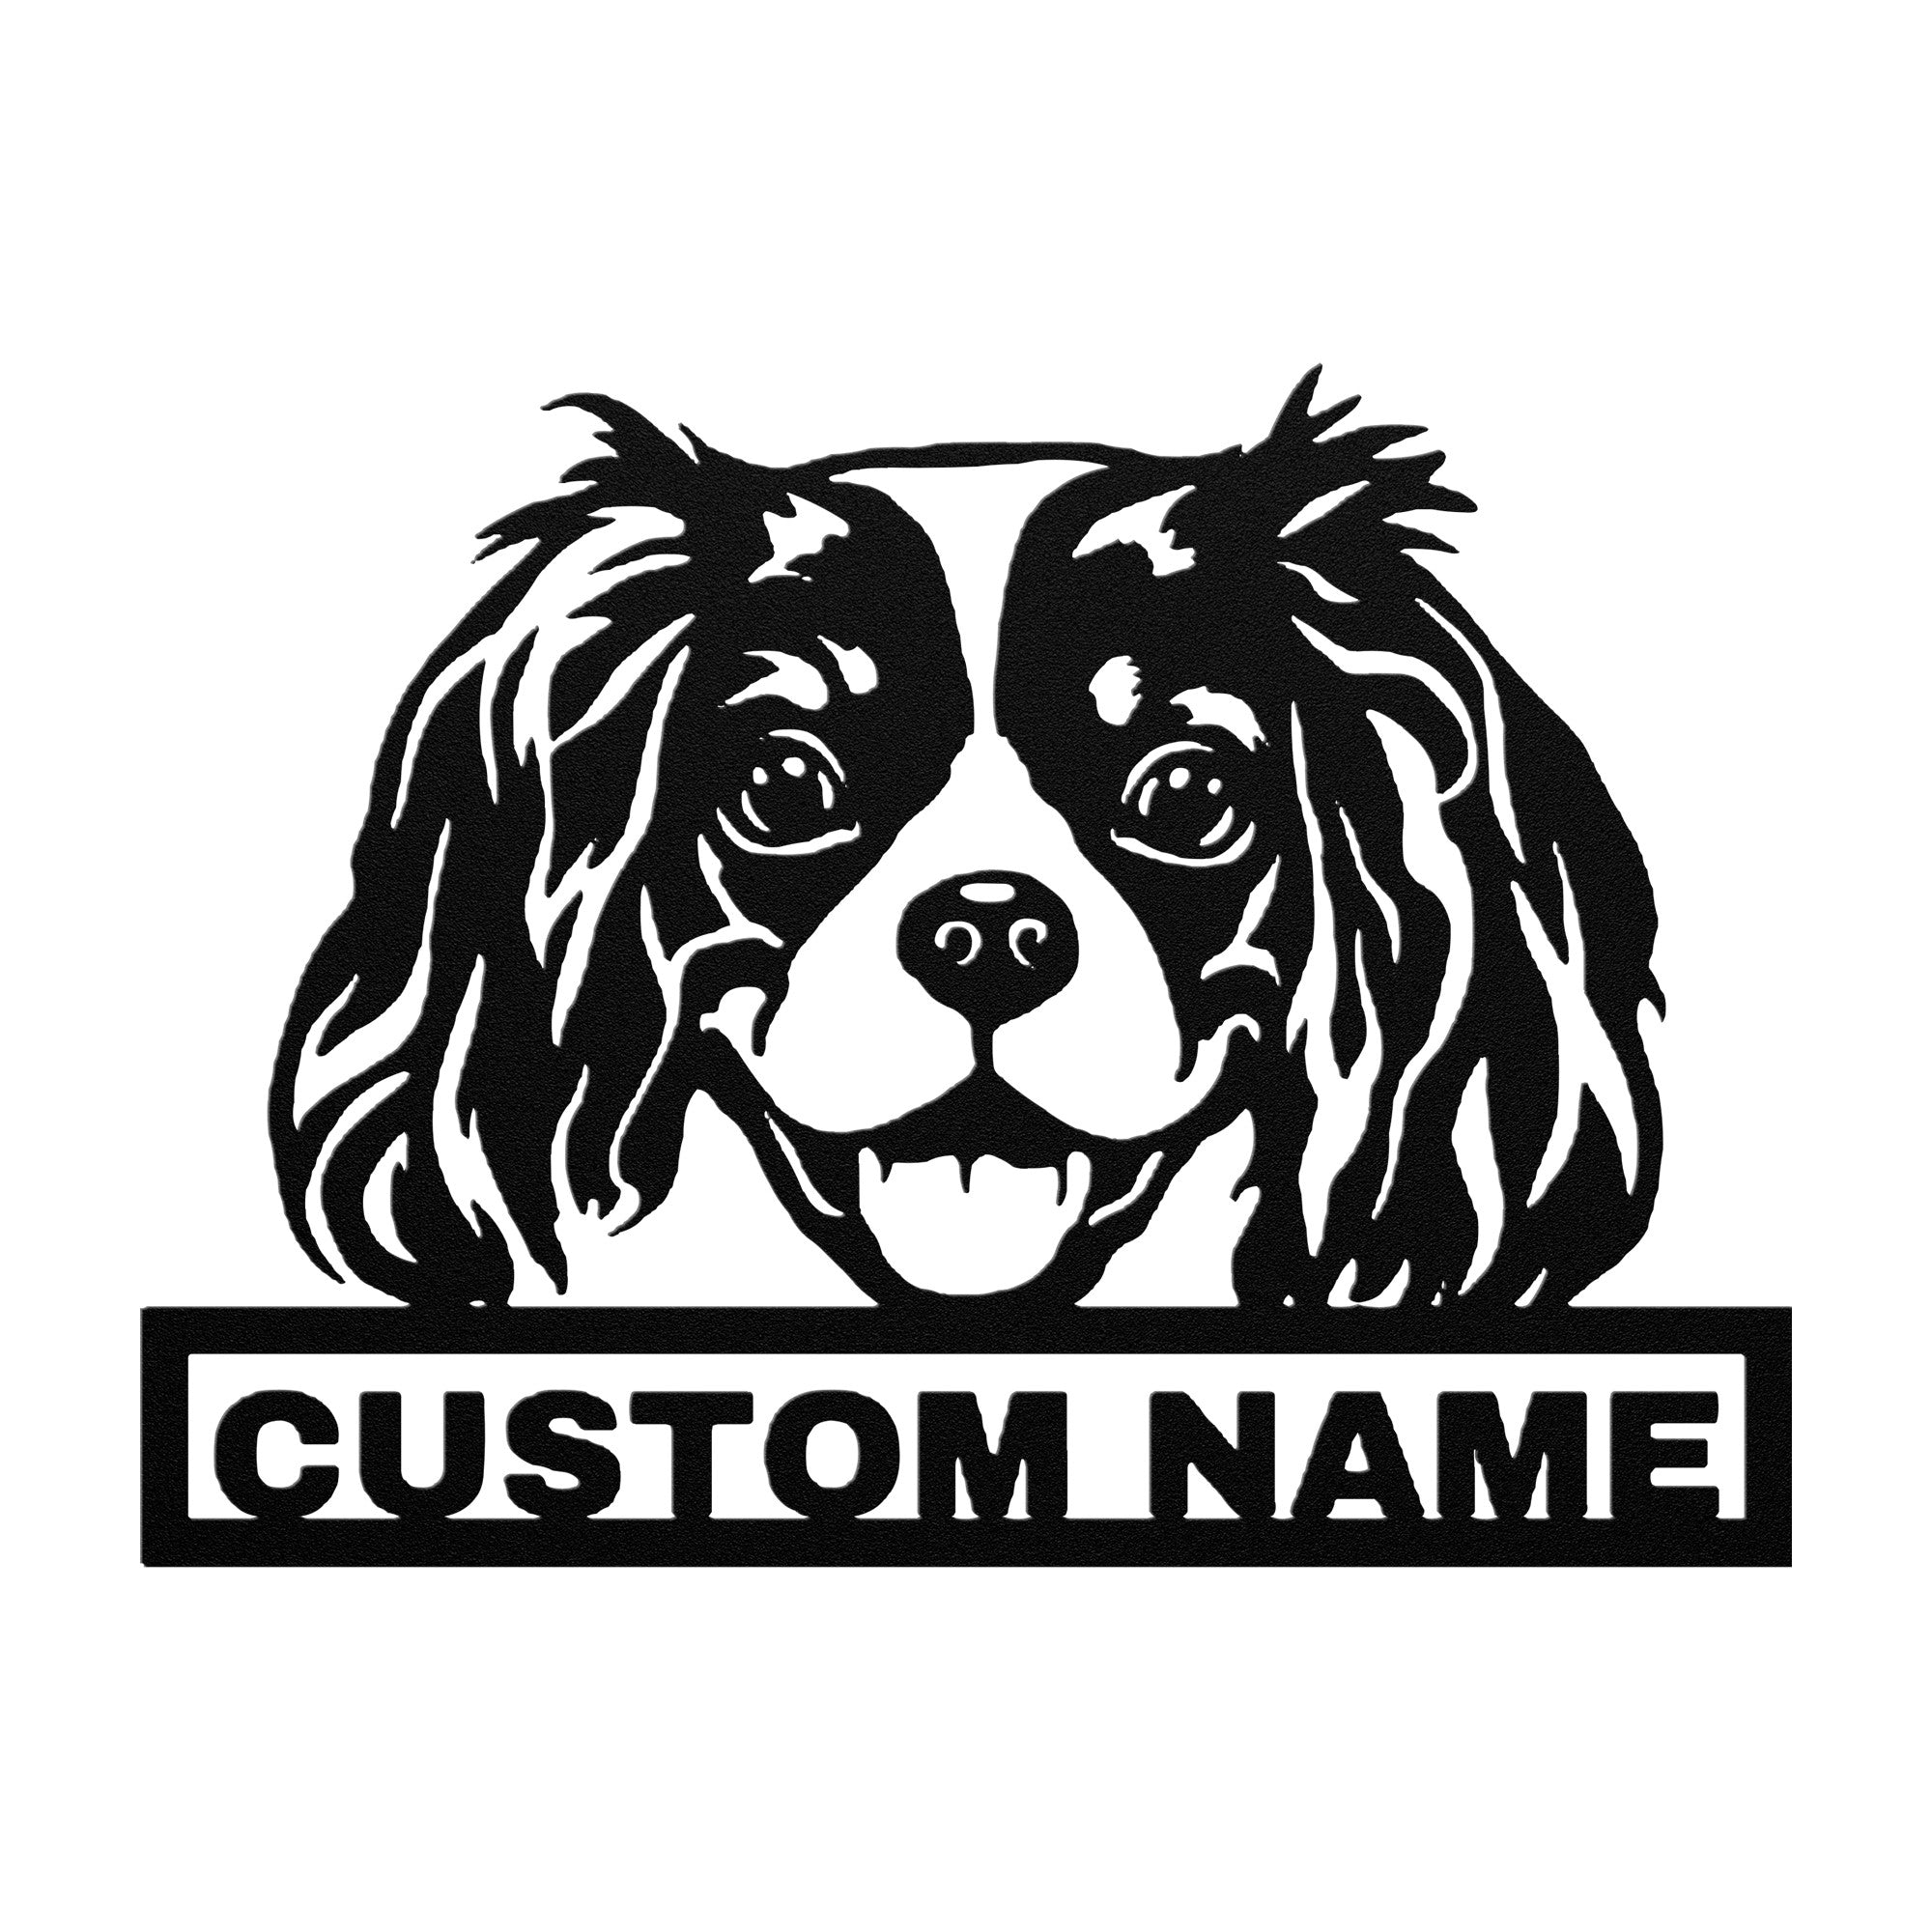 Personalized Cavalier King Charles Spaniel Dog Metal Sign - Custom Name Wall Decor, Metal Signs Customized Outdoor Indoor, Wall Art Gift For Cavalier King Charles Spaniel Dog Lover